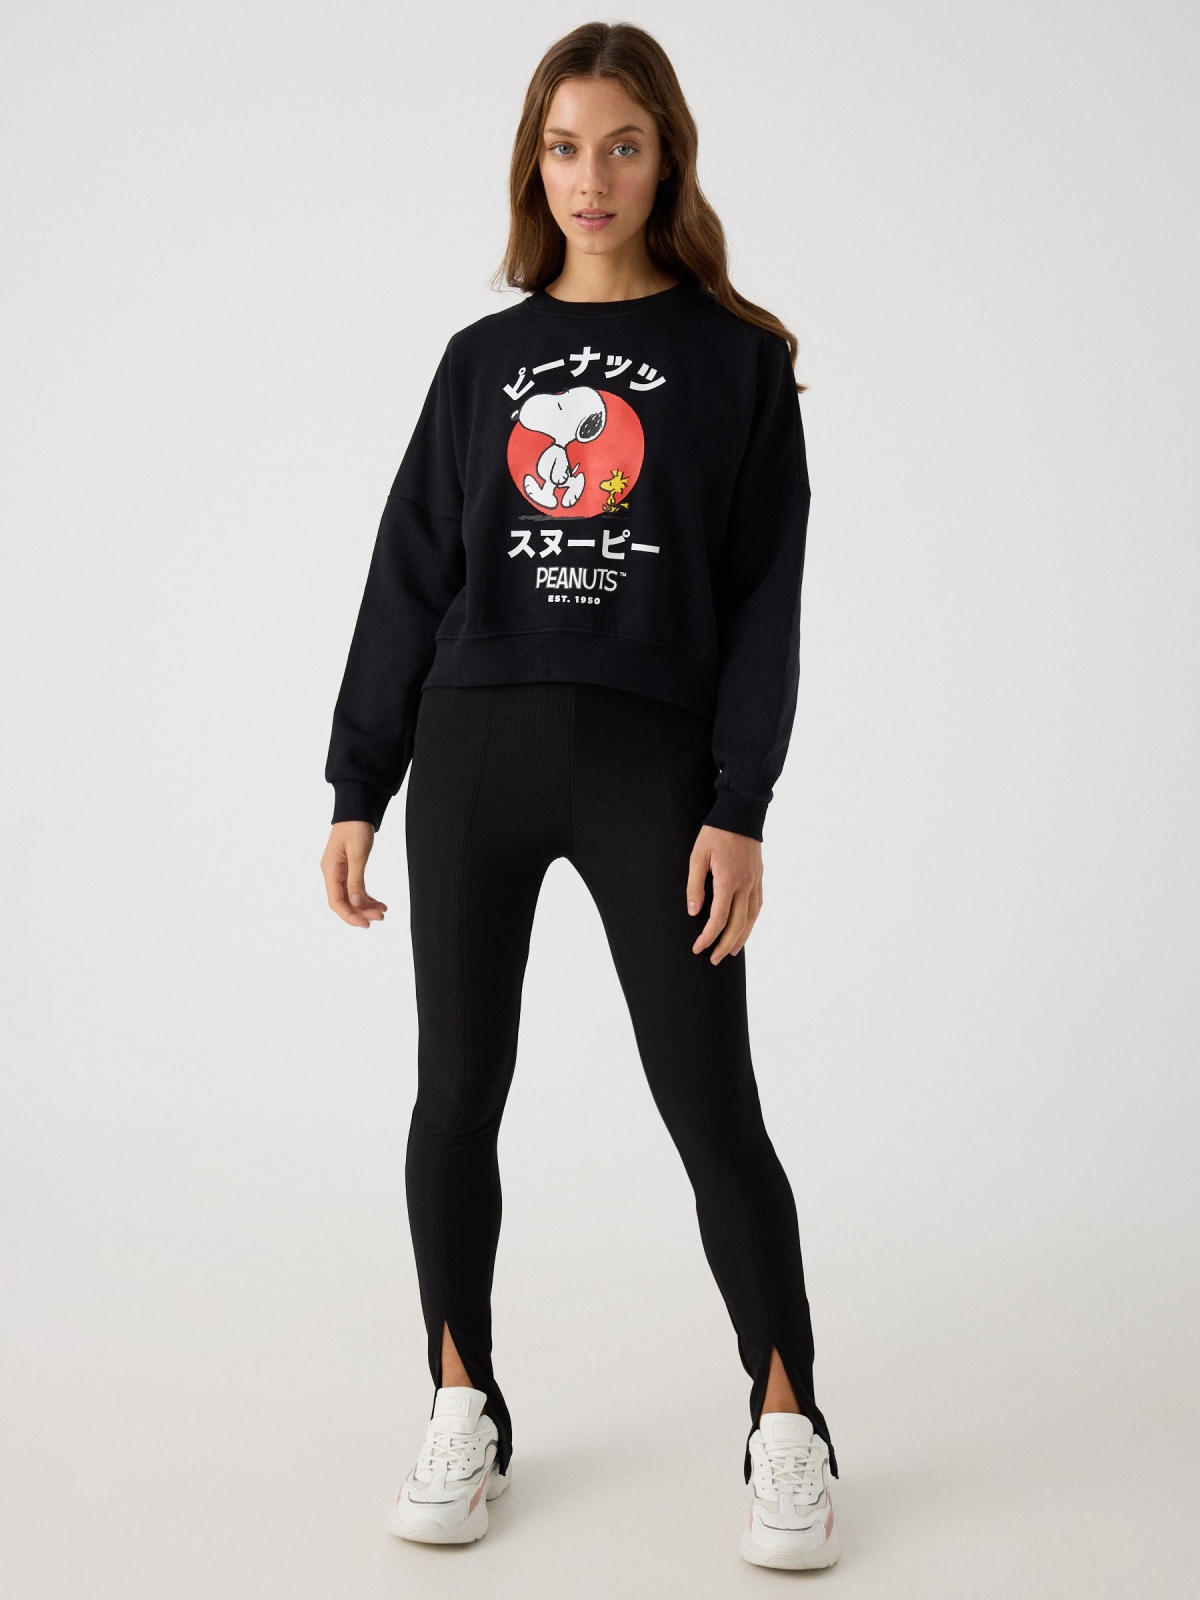 Snoopy cropped sweatshirt black front view